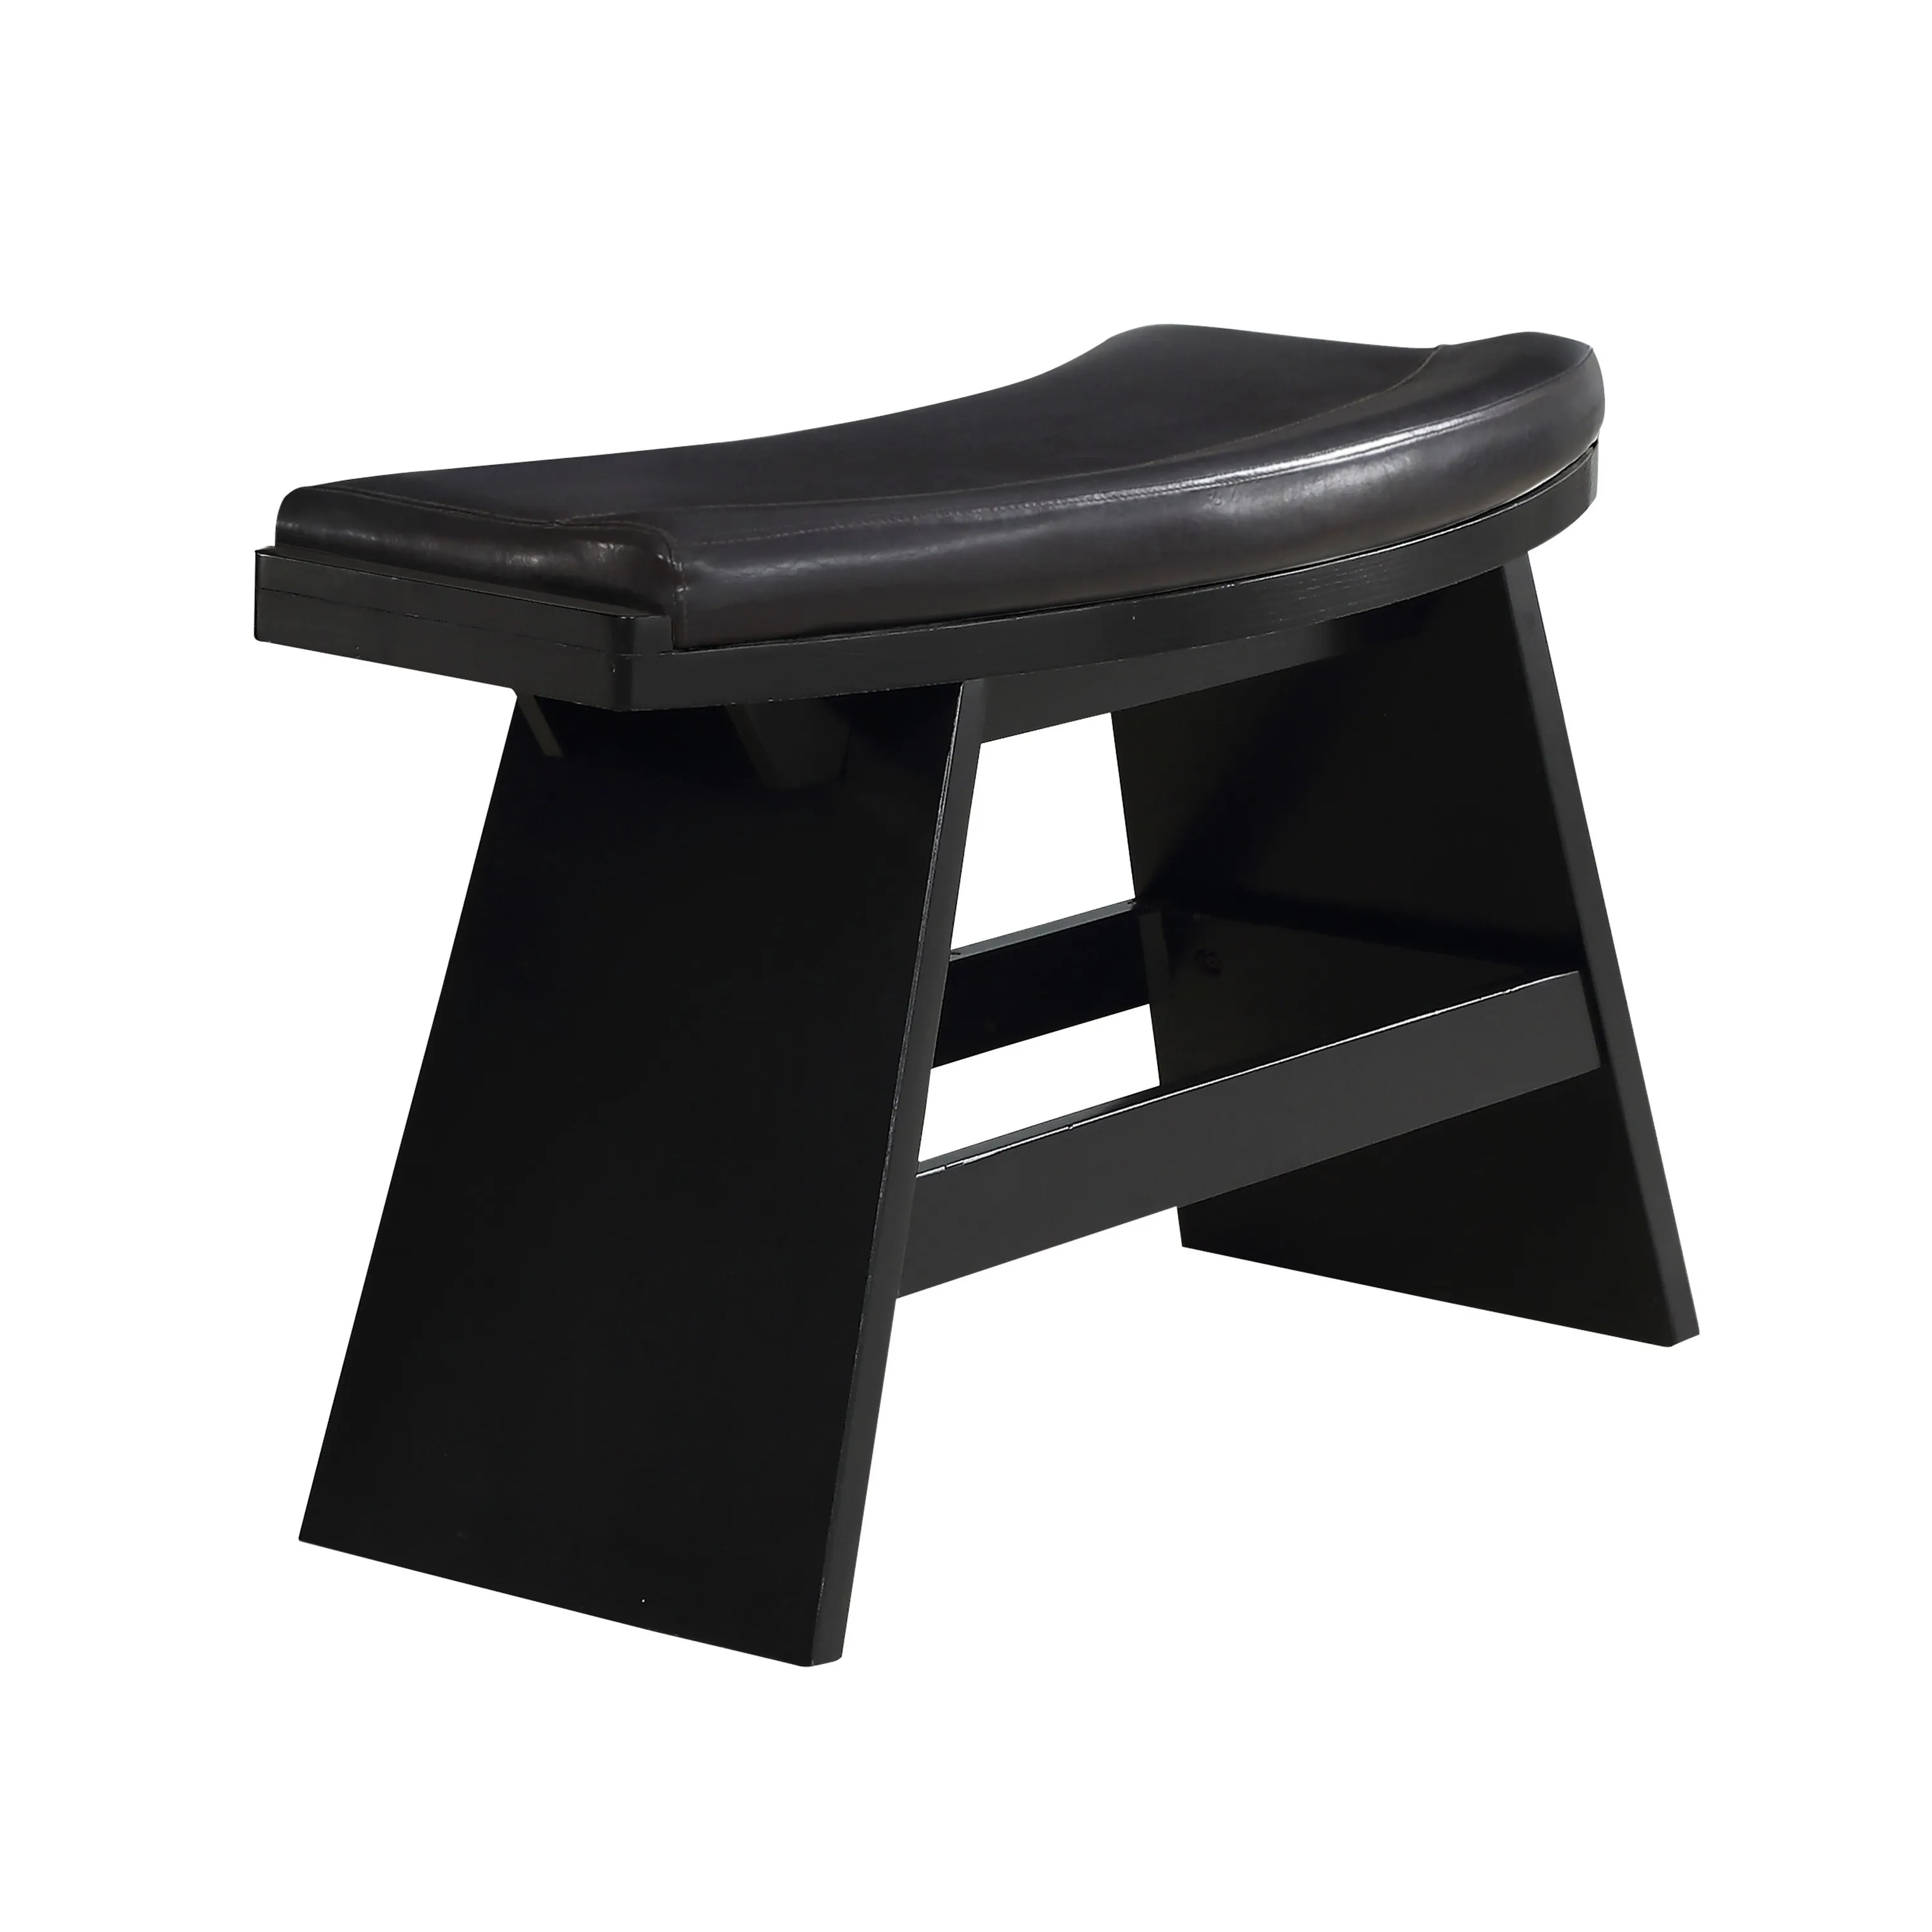 Elsaa 31 Inch Bar Height Bench, Black Faux Leather Upholstery, Solid Wood - Benzara